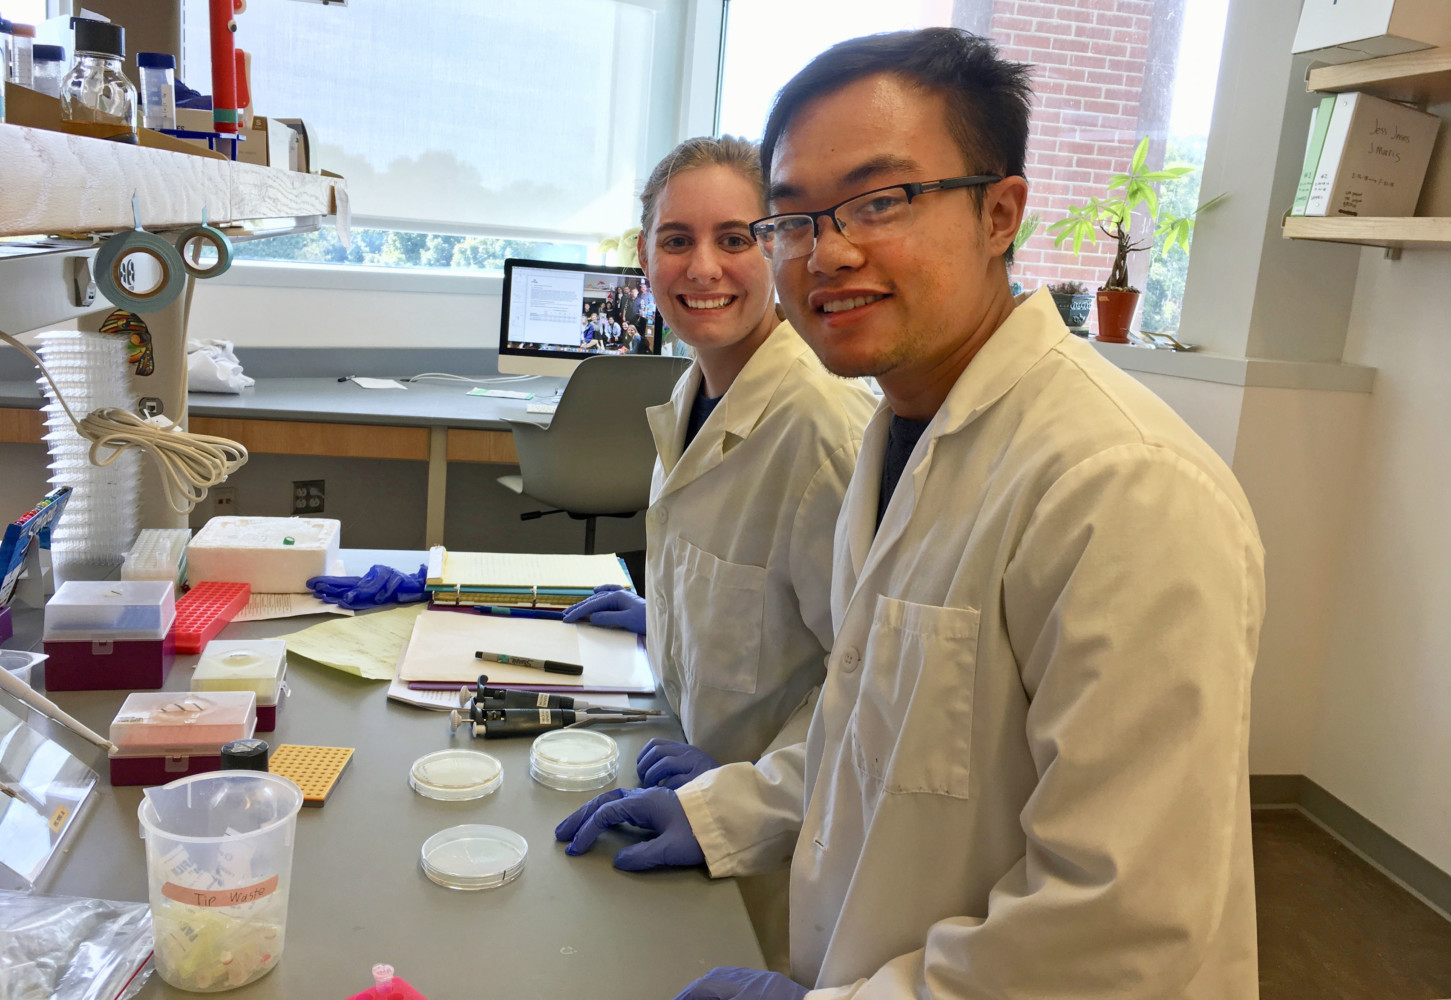 Biochemistry majors Chloe Champion (left) and Nelson Yeung are among the Clemson University students who could benefit from the new accreditation.